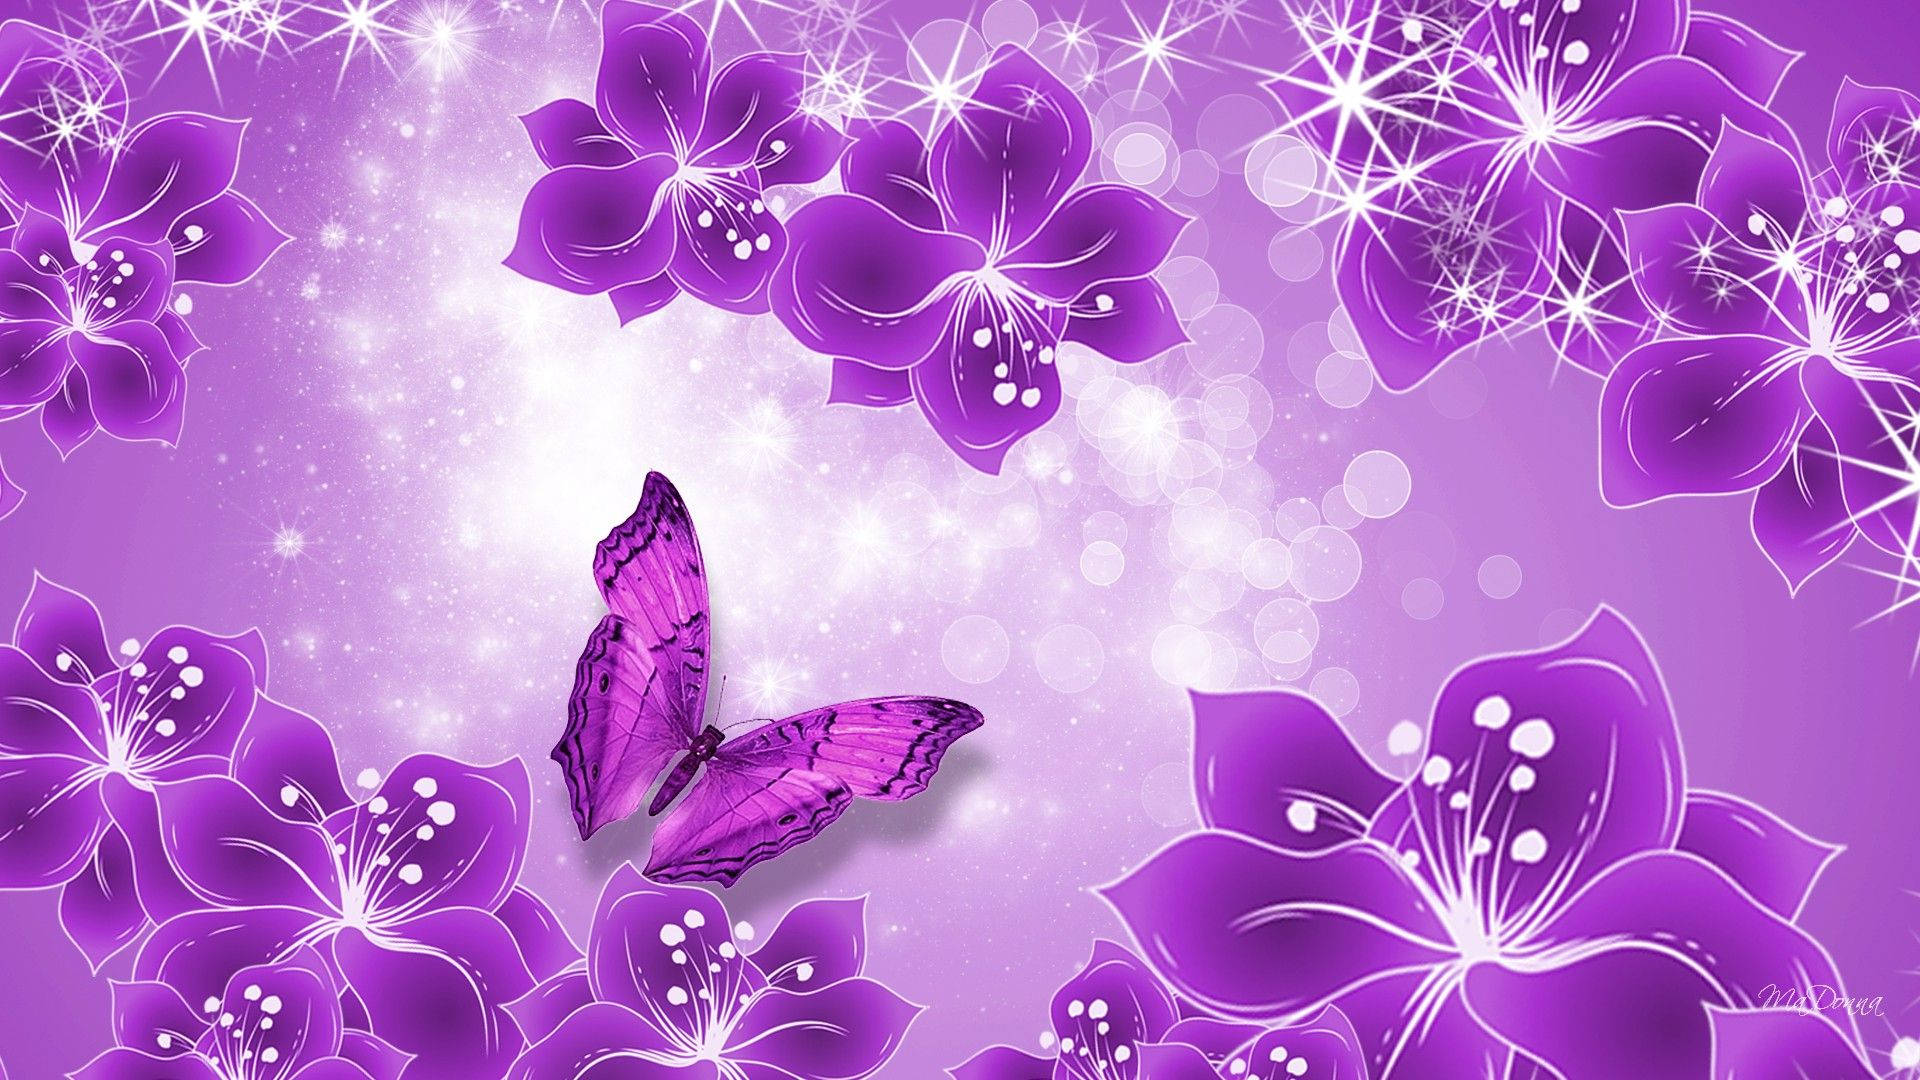 Purple flowers and butterfly background wallpaper.